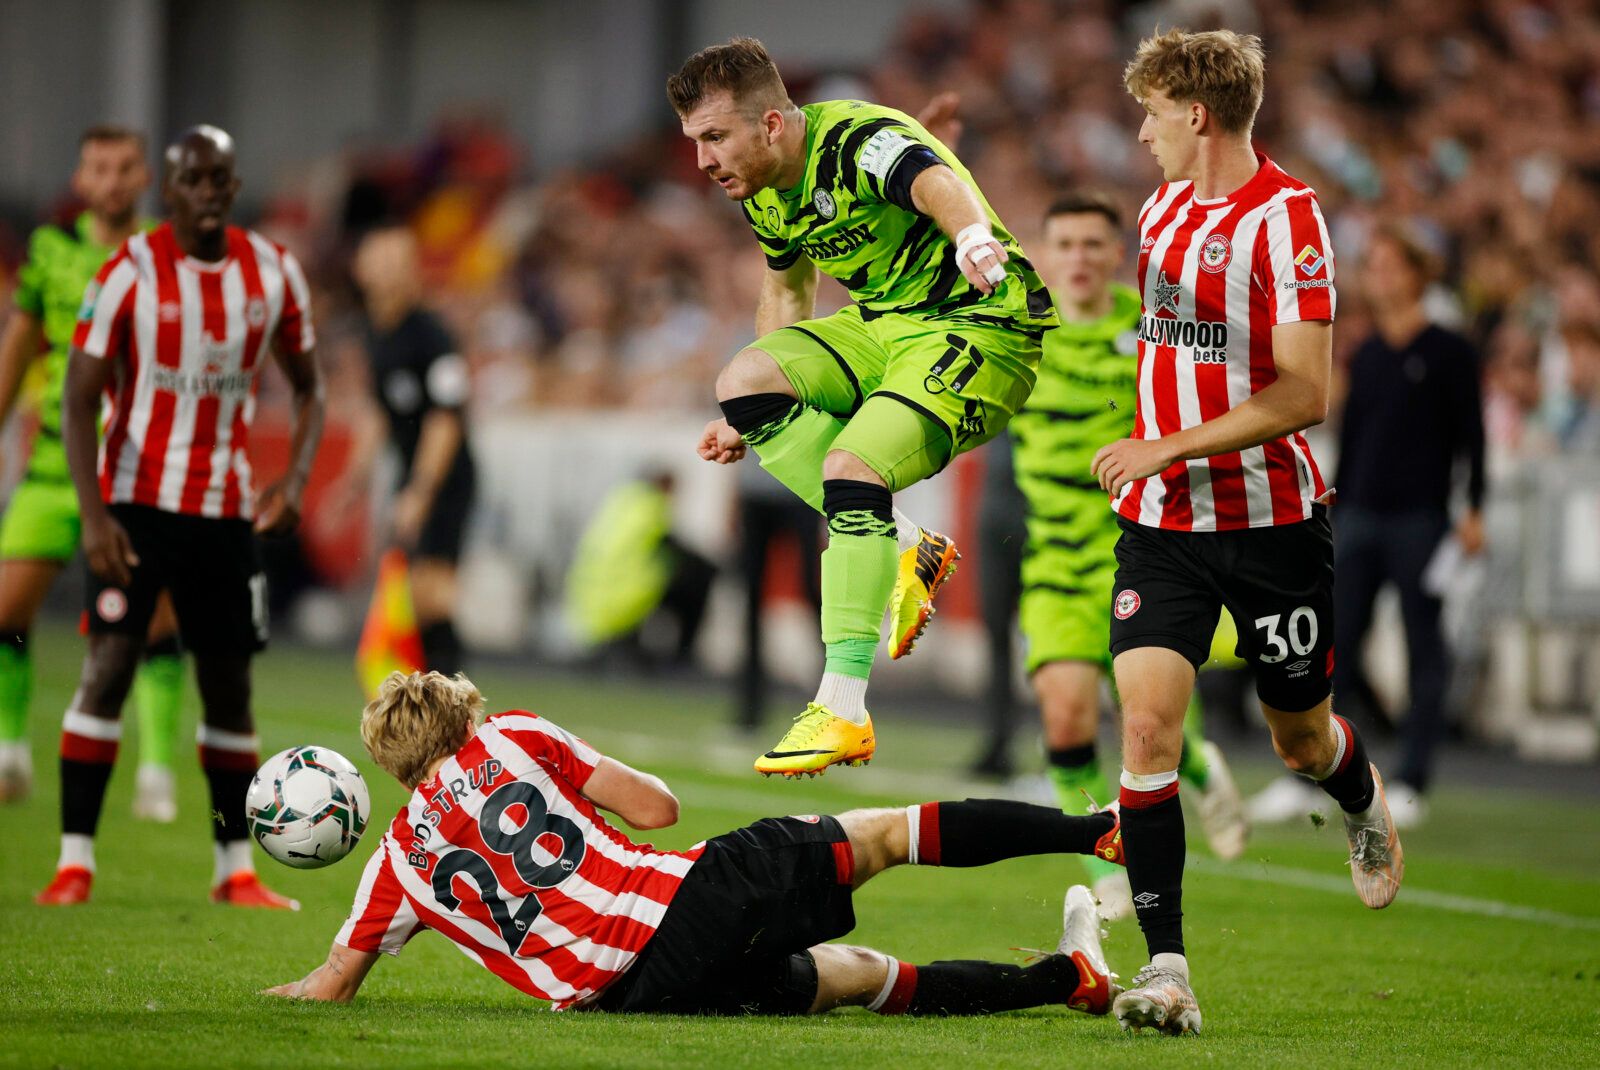 Soccer - England - Carabao Cup Second Round - Brentford v Forest Green Rovers - Community Stadium, London, Britain - August 24, 2021  Forest Green Rovers' Nicky Cadden in action with Brentford's Mads Bidstrup and Mads Roerslev Action Images via Reuters/John Sibley